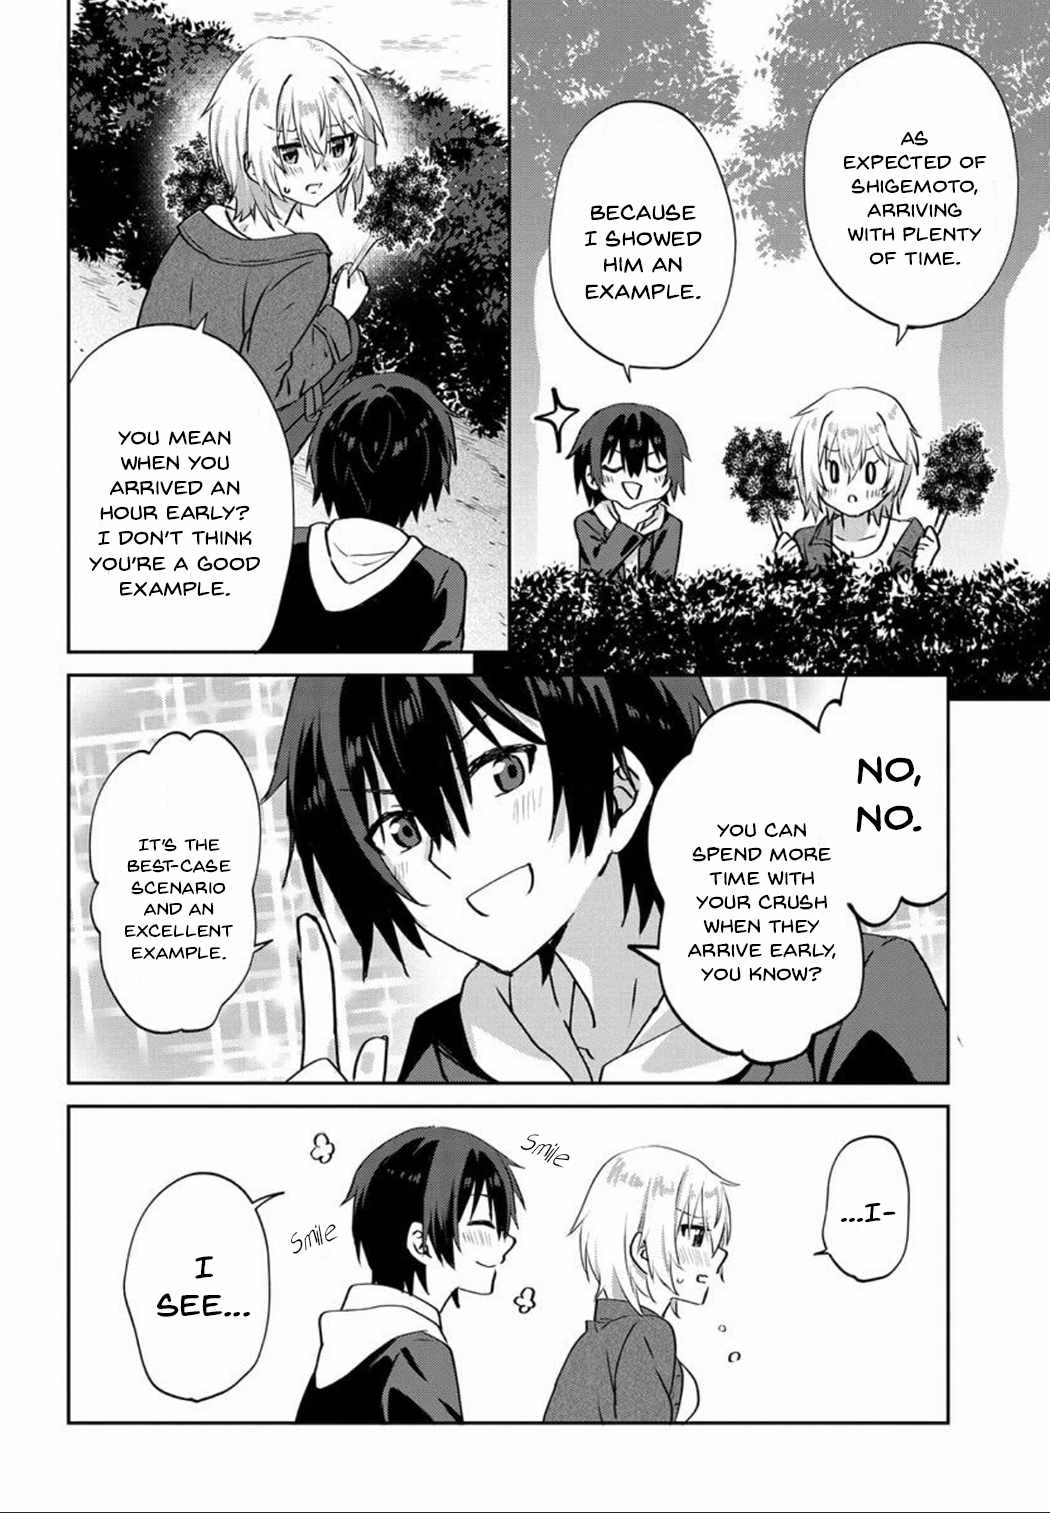 Since I’ve Entered the World of Romantic Comedy Manga, I’ll Do My Best to Make the Losing Heroine Happy. Chapter 6-2-eng-li - Page 4